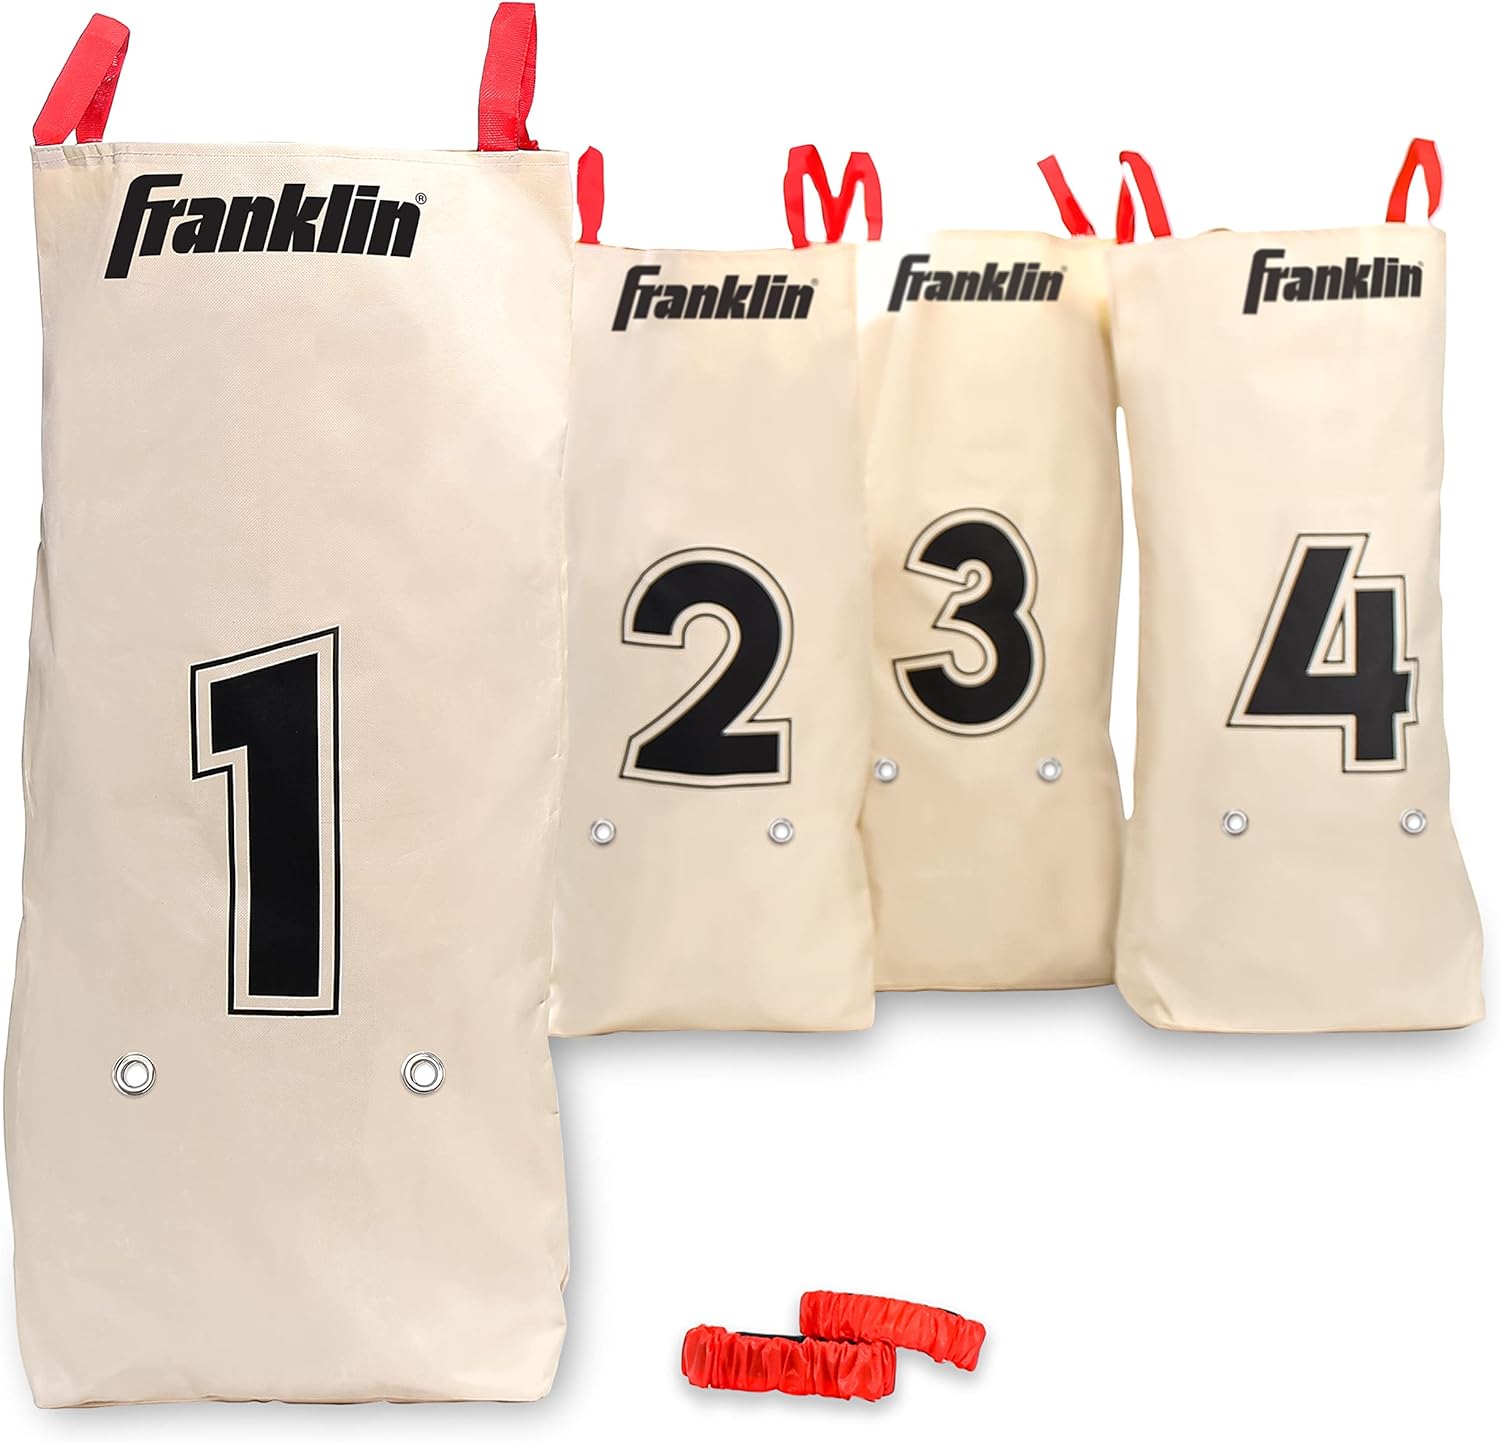 Franklin Field Day Potato Sack Race Bags &3-Legged Race Bands Game Kit - Great for Kids - 2 Games in 1